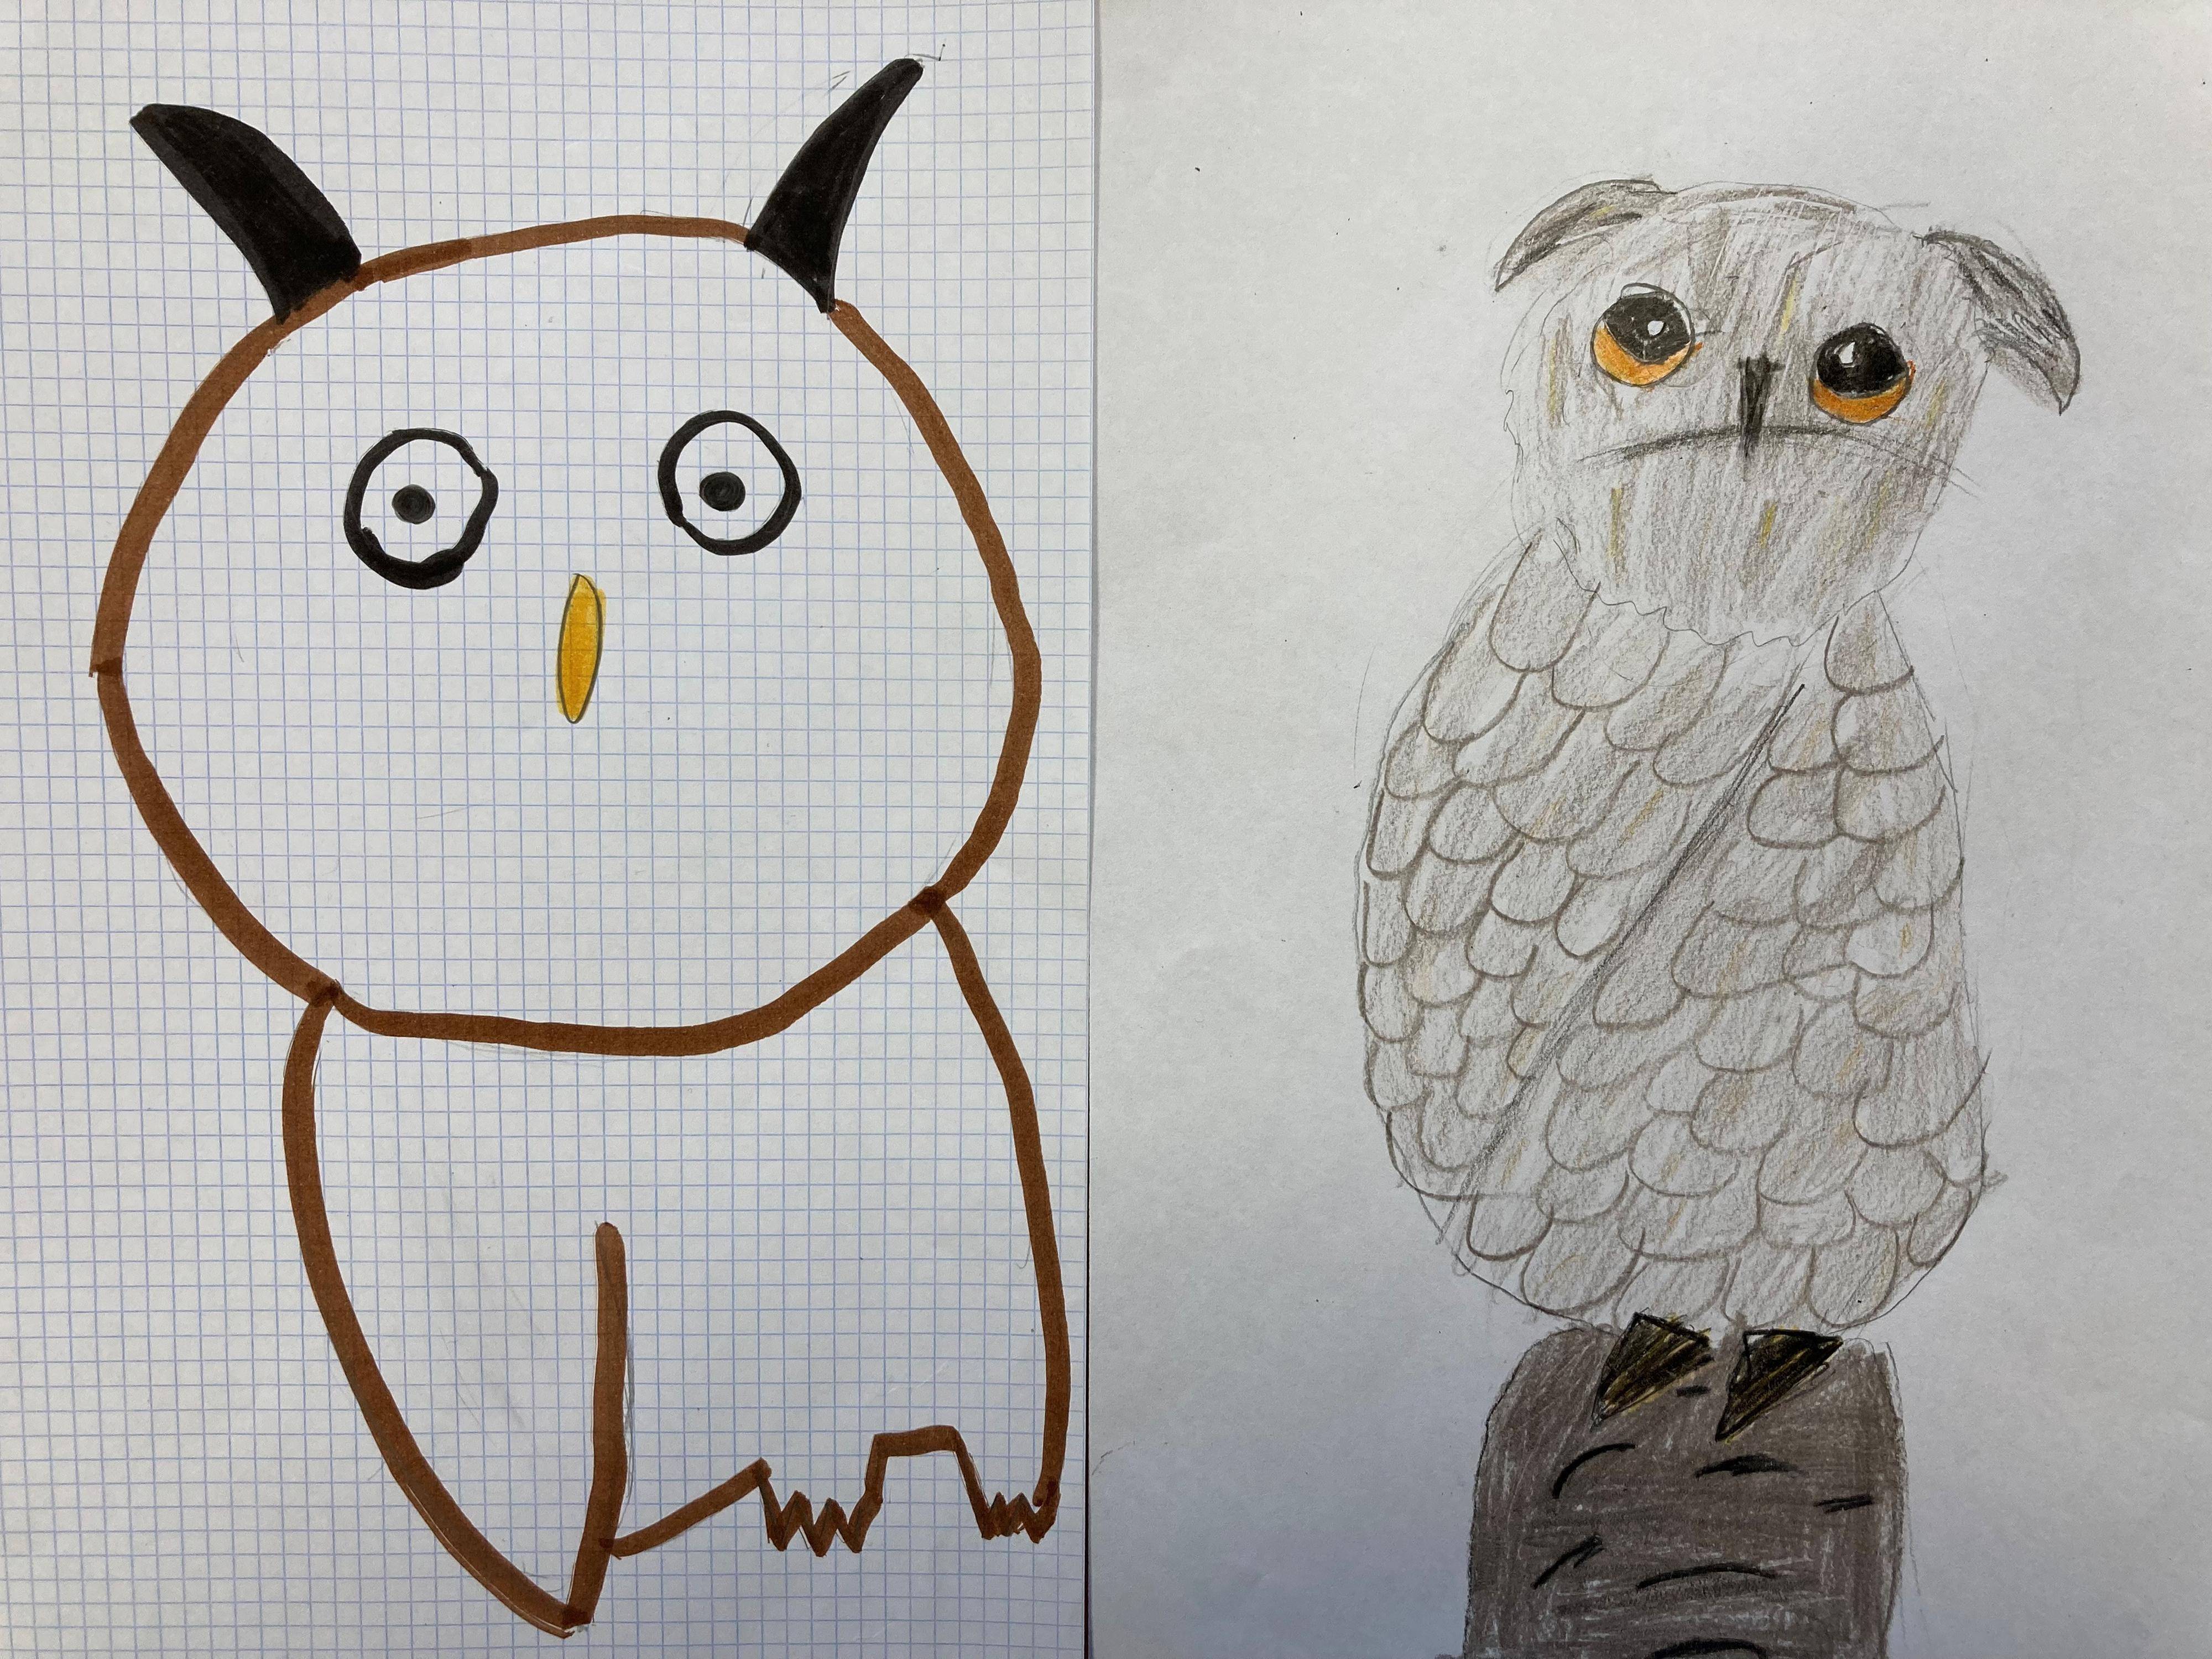 Drawings of owls by children aged 6 - 9 years. Credit: Juan J. Negro.